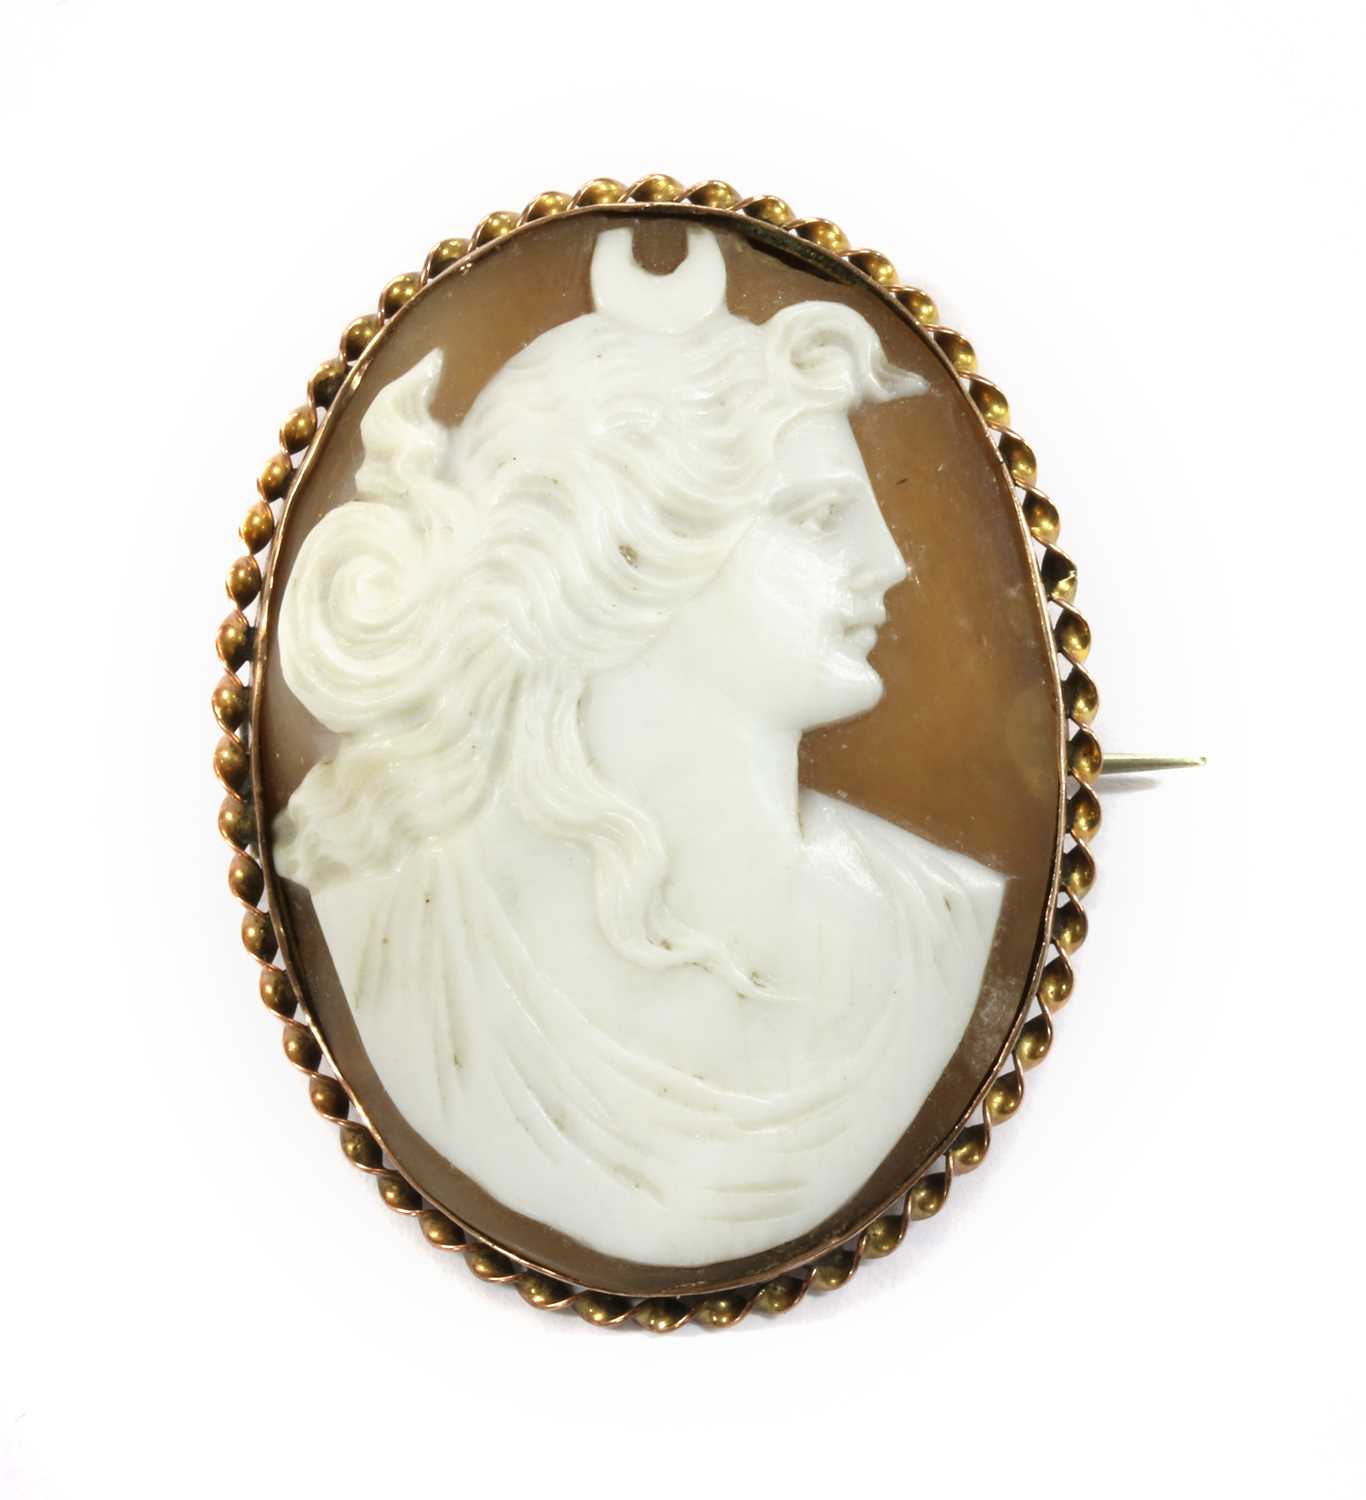 Lot 10 - A gold mounted shell cameo brooch